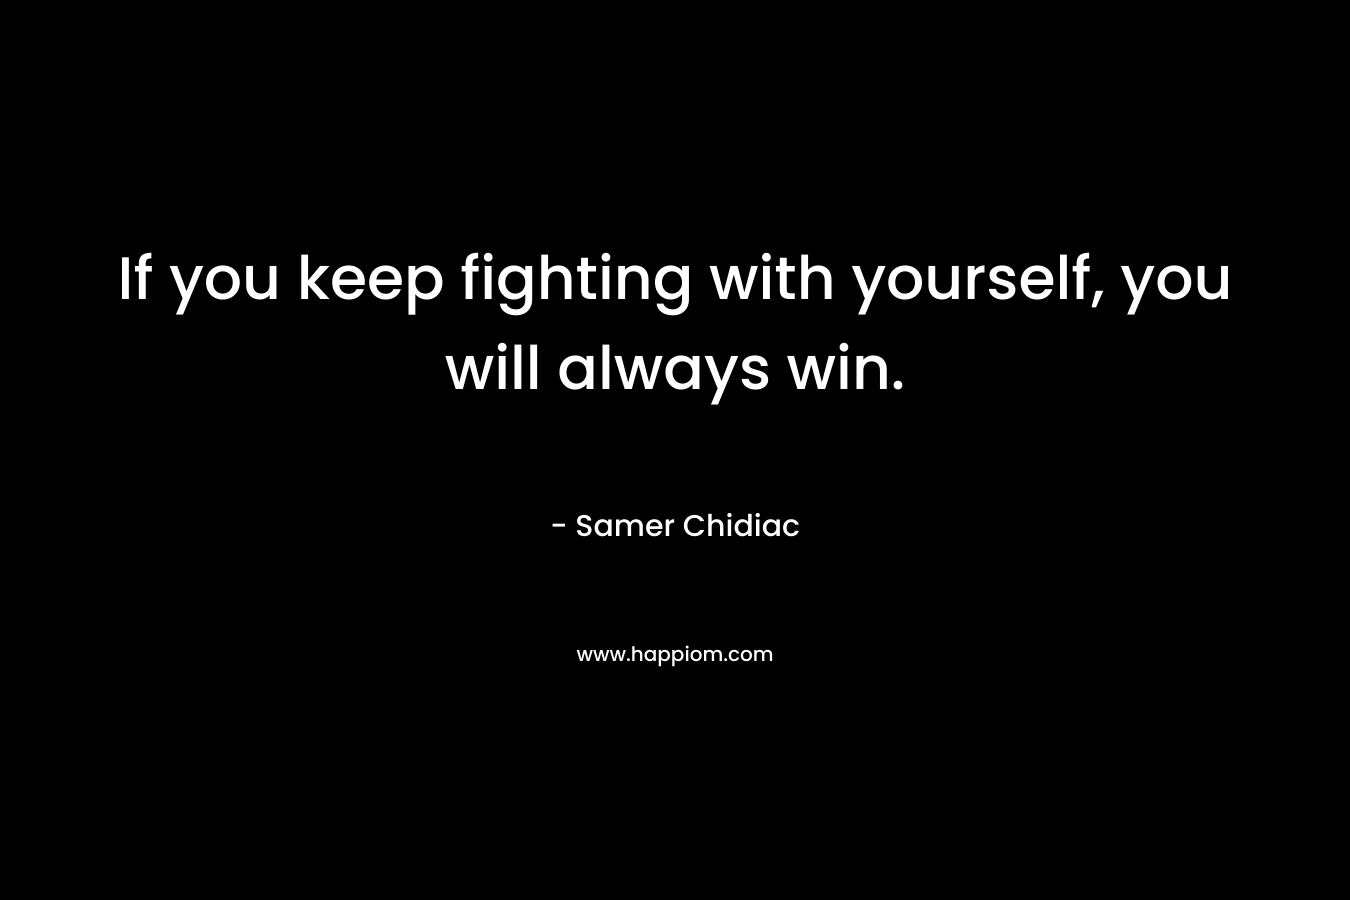 If you keep fighting with yourself, you will always win. – Samer Chidiac